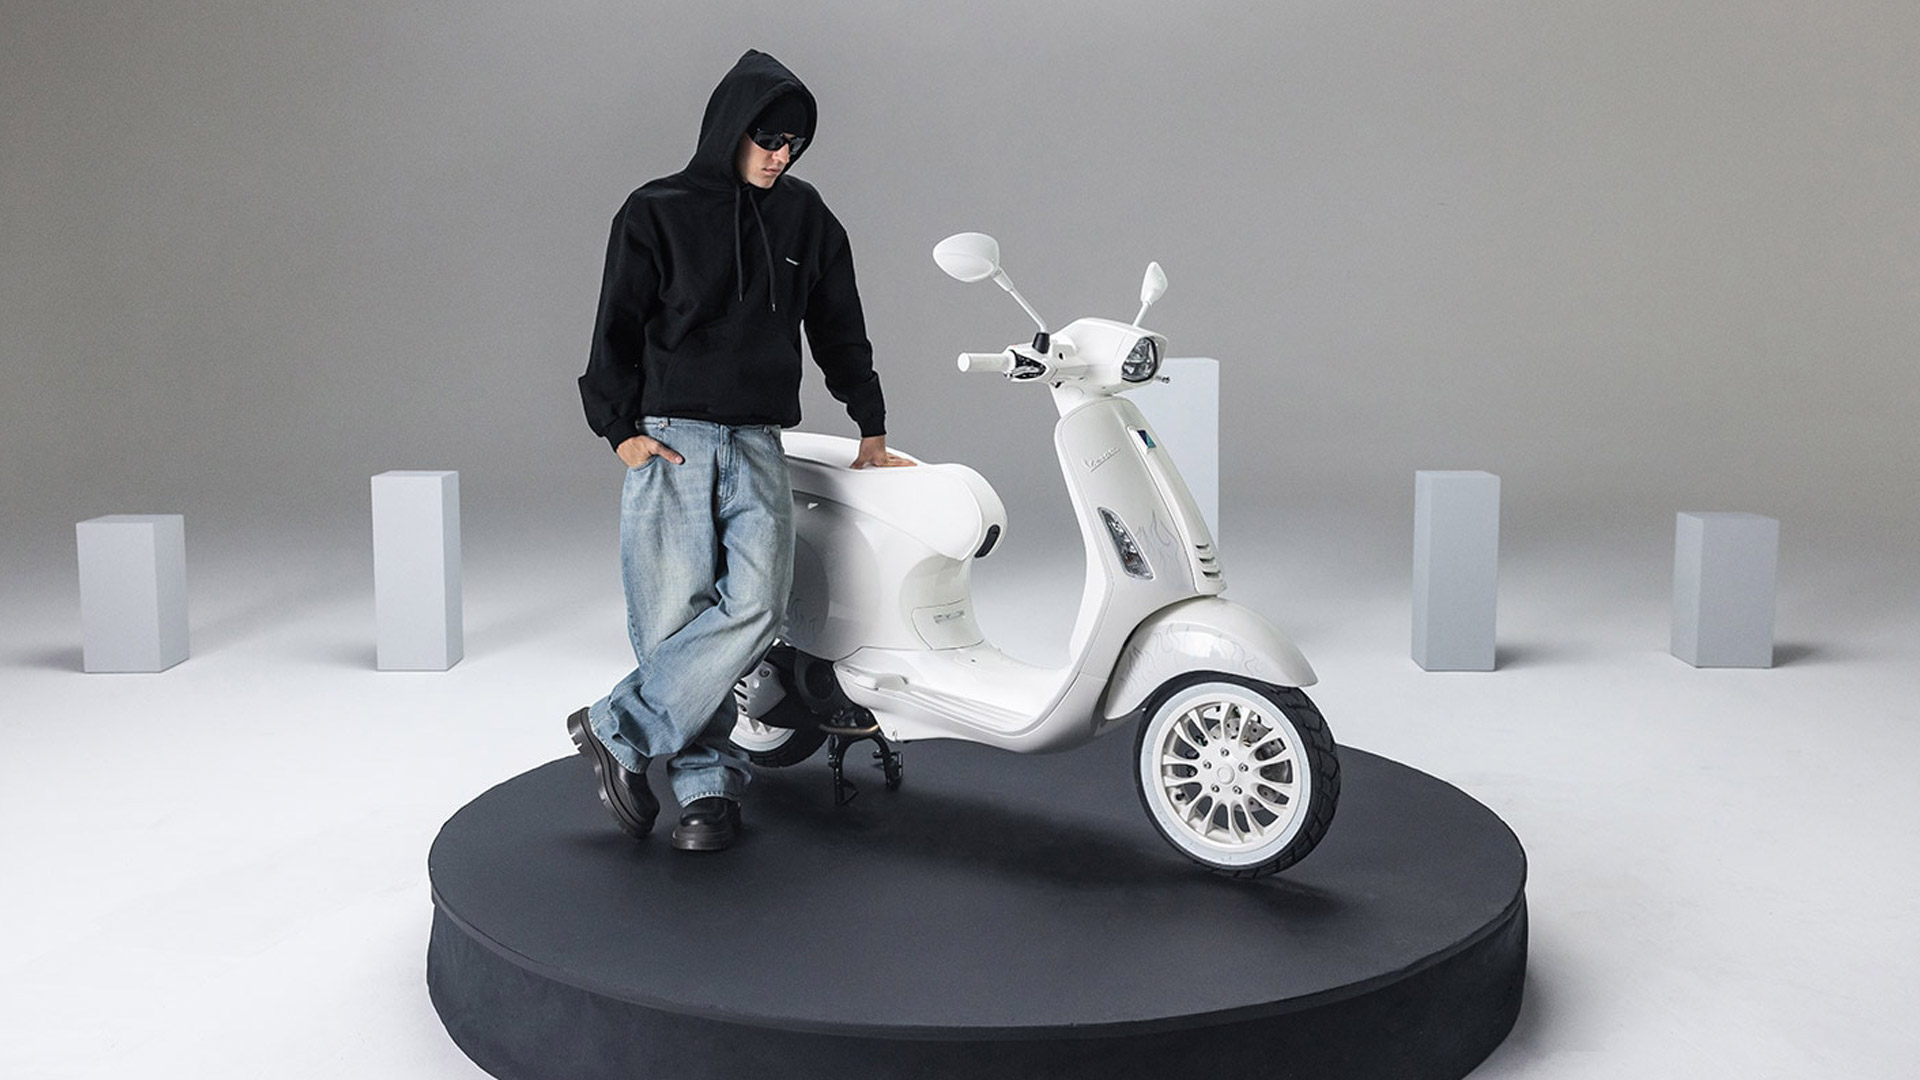 White Vespa Sprint Justin Bieber used, fuel Petrol and Automatic gearbox, 0  - 4.793 €